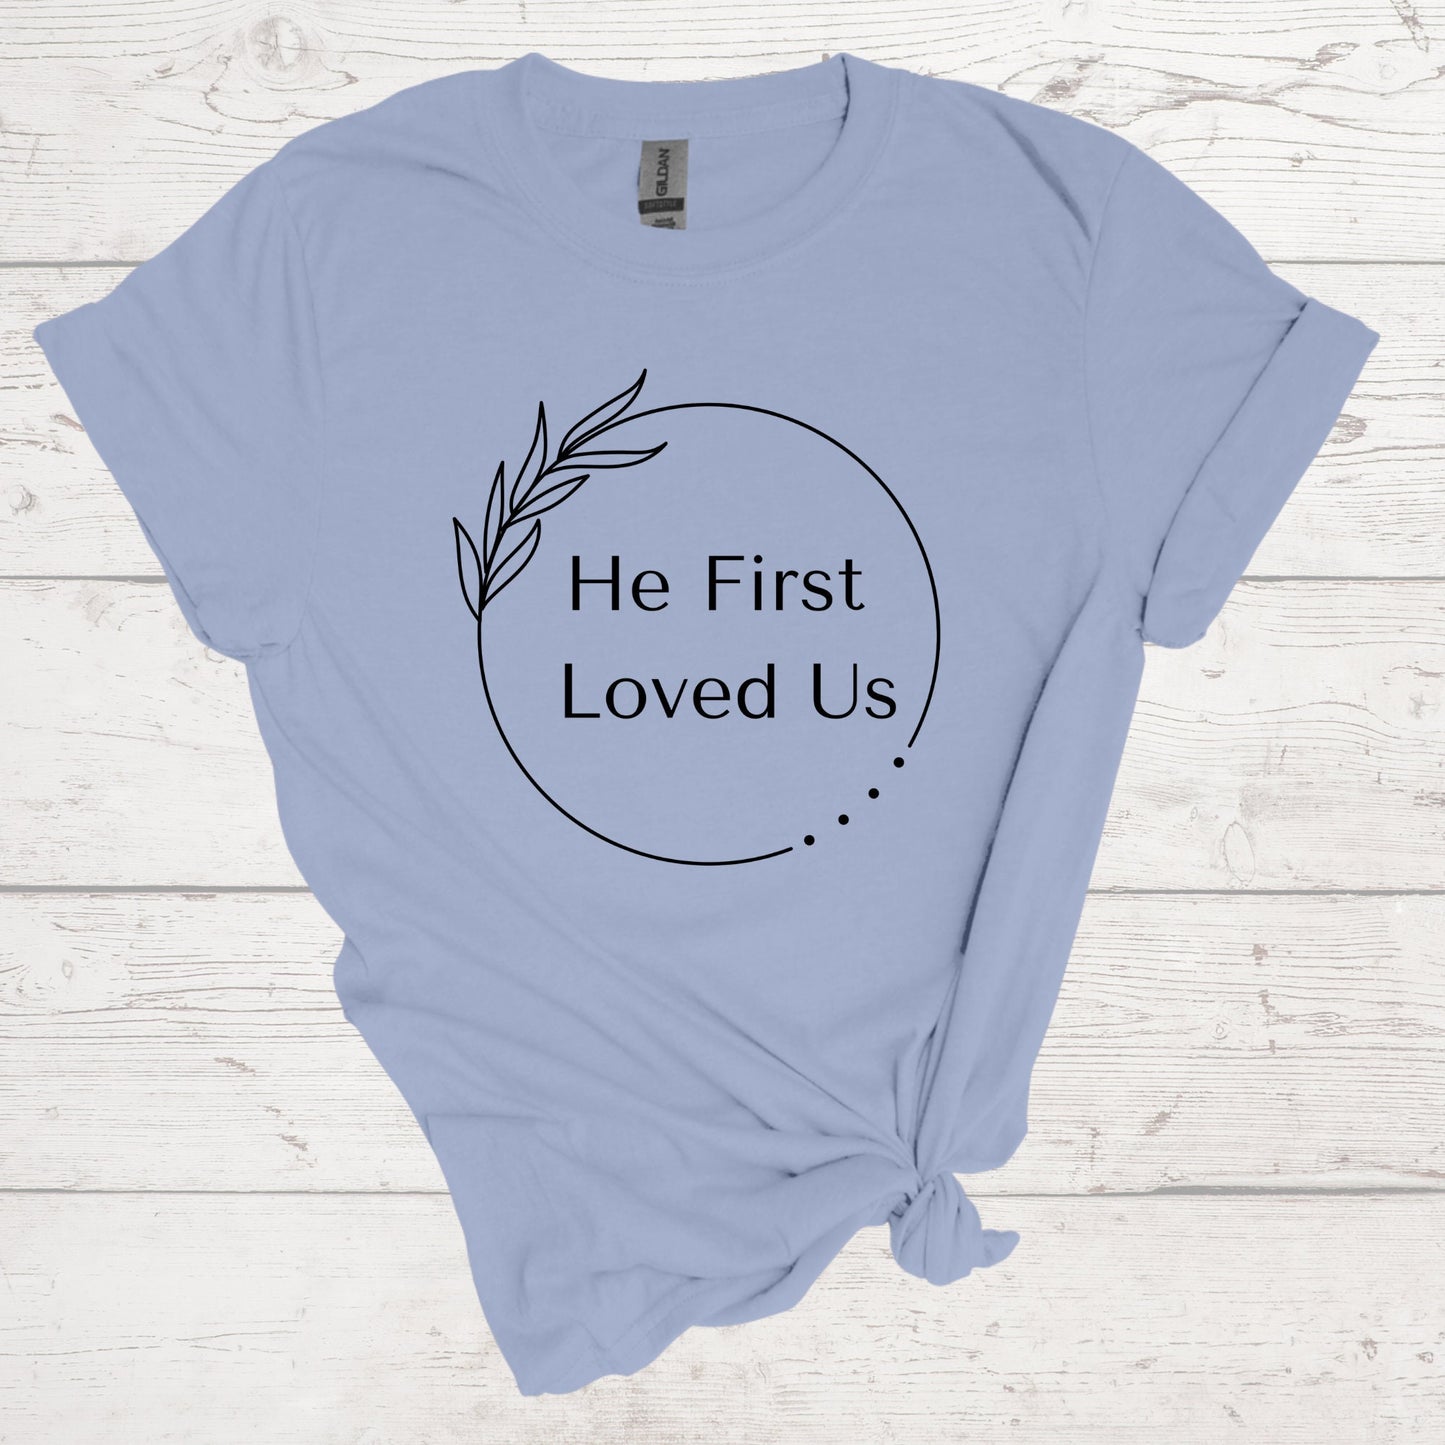 He First Loved Us Shirt